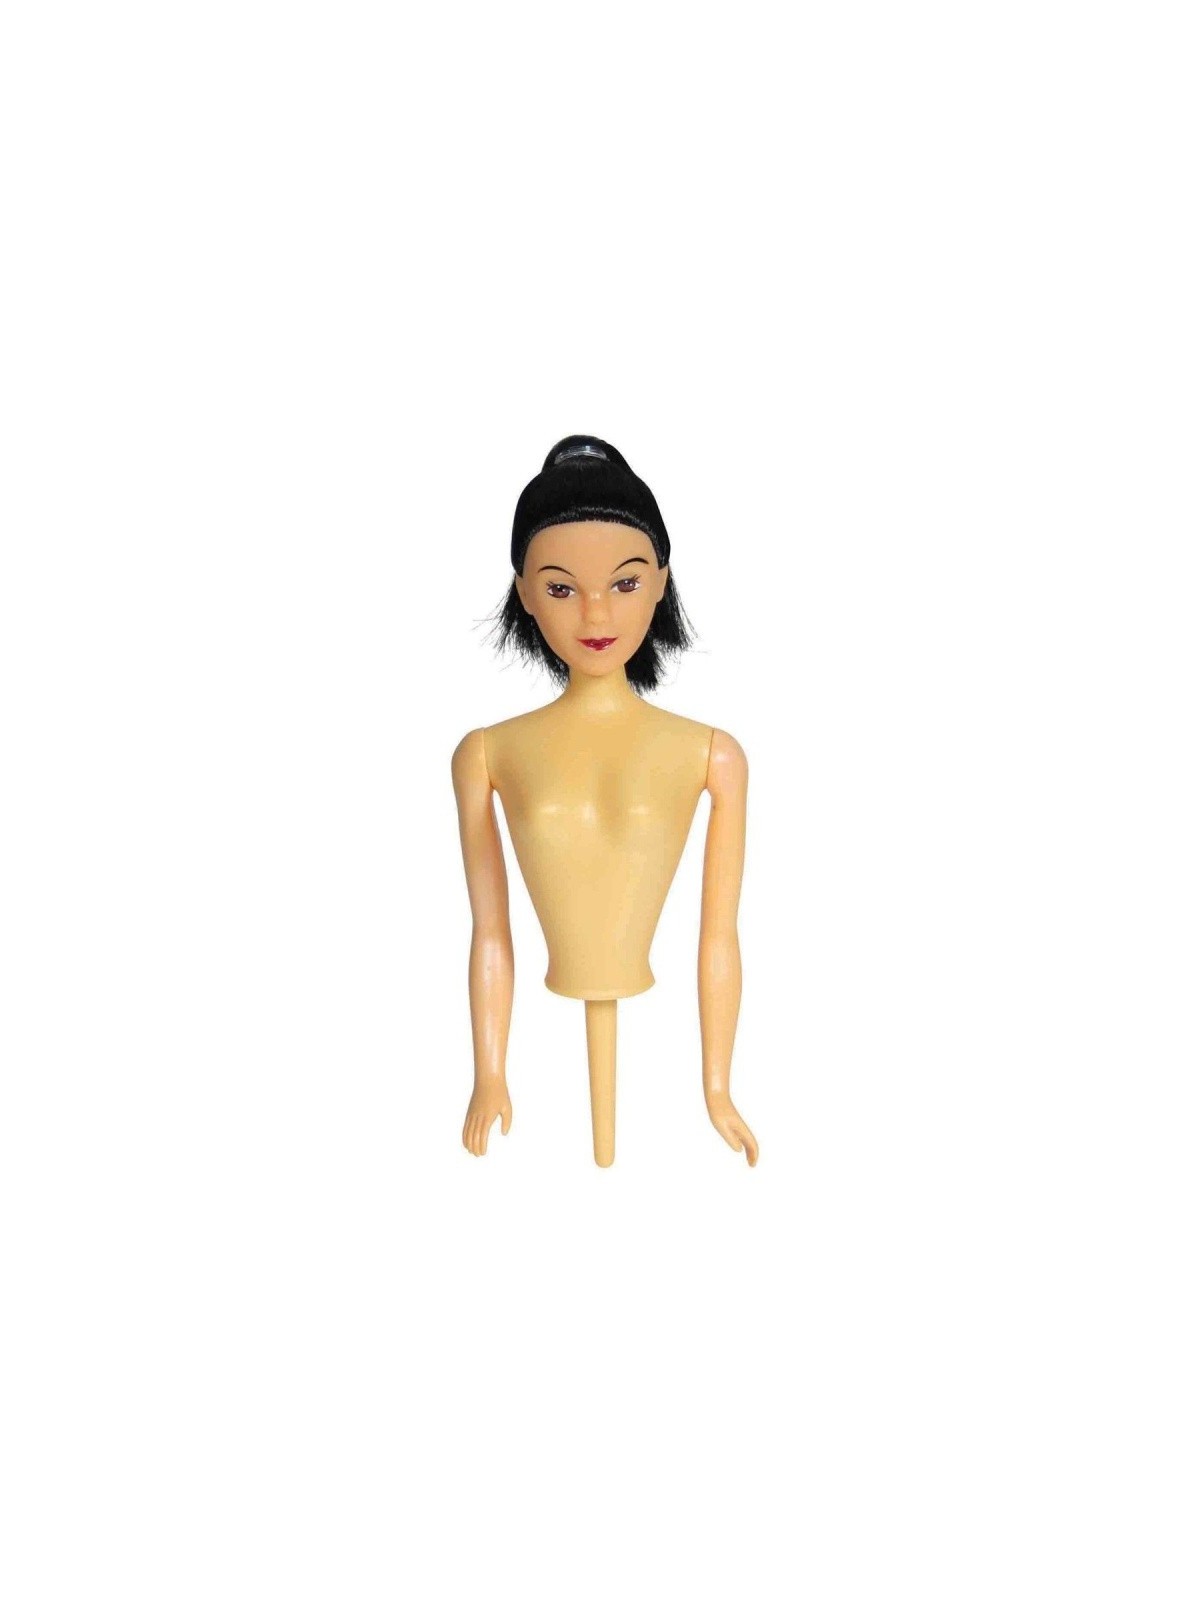 PME doll pick with black hair